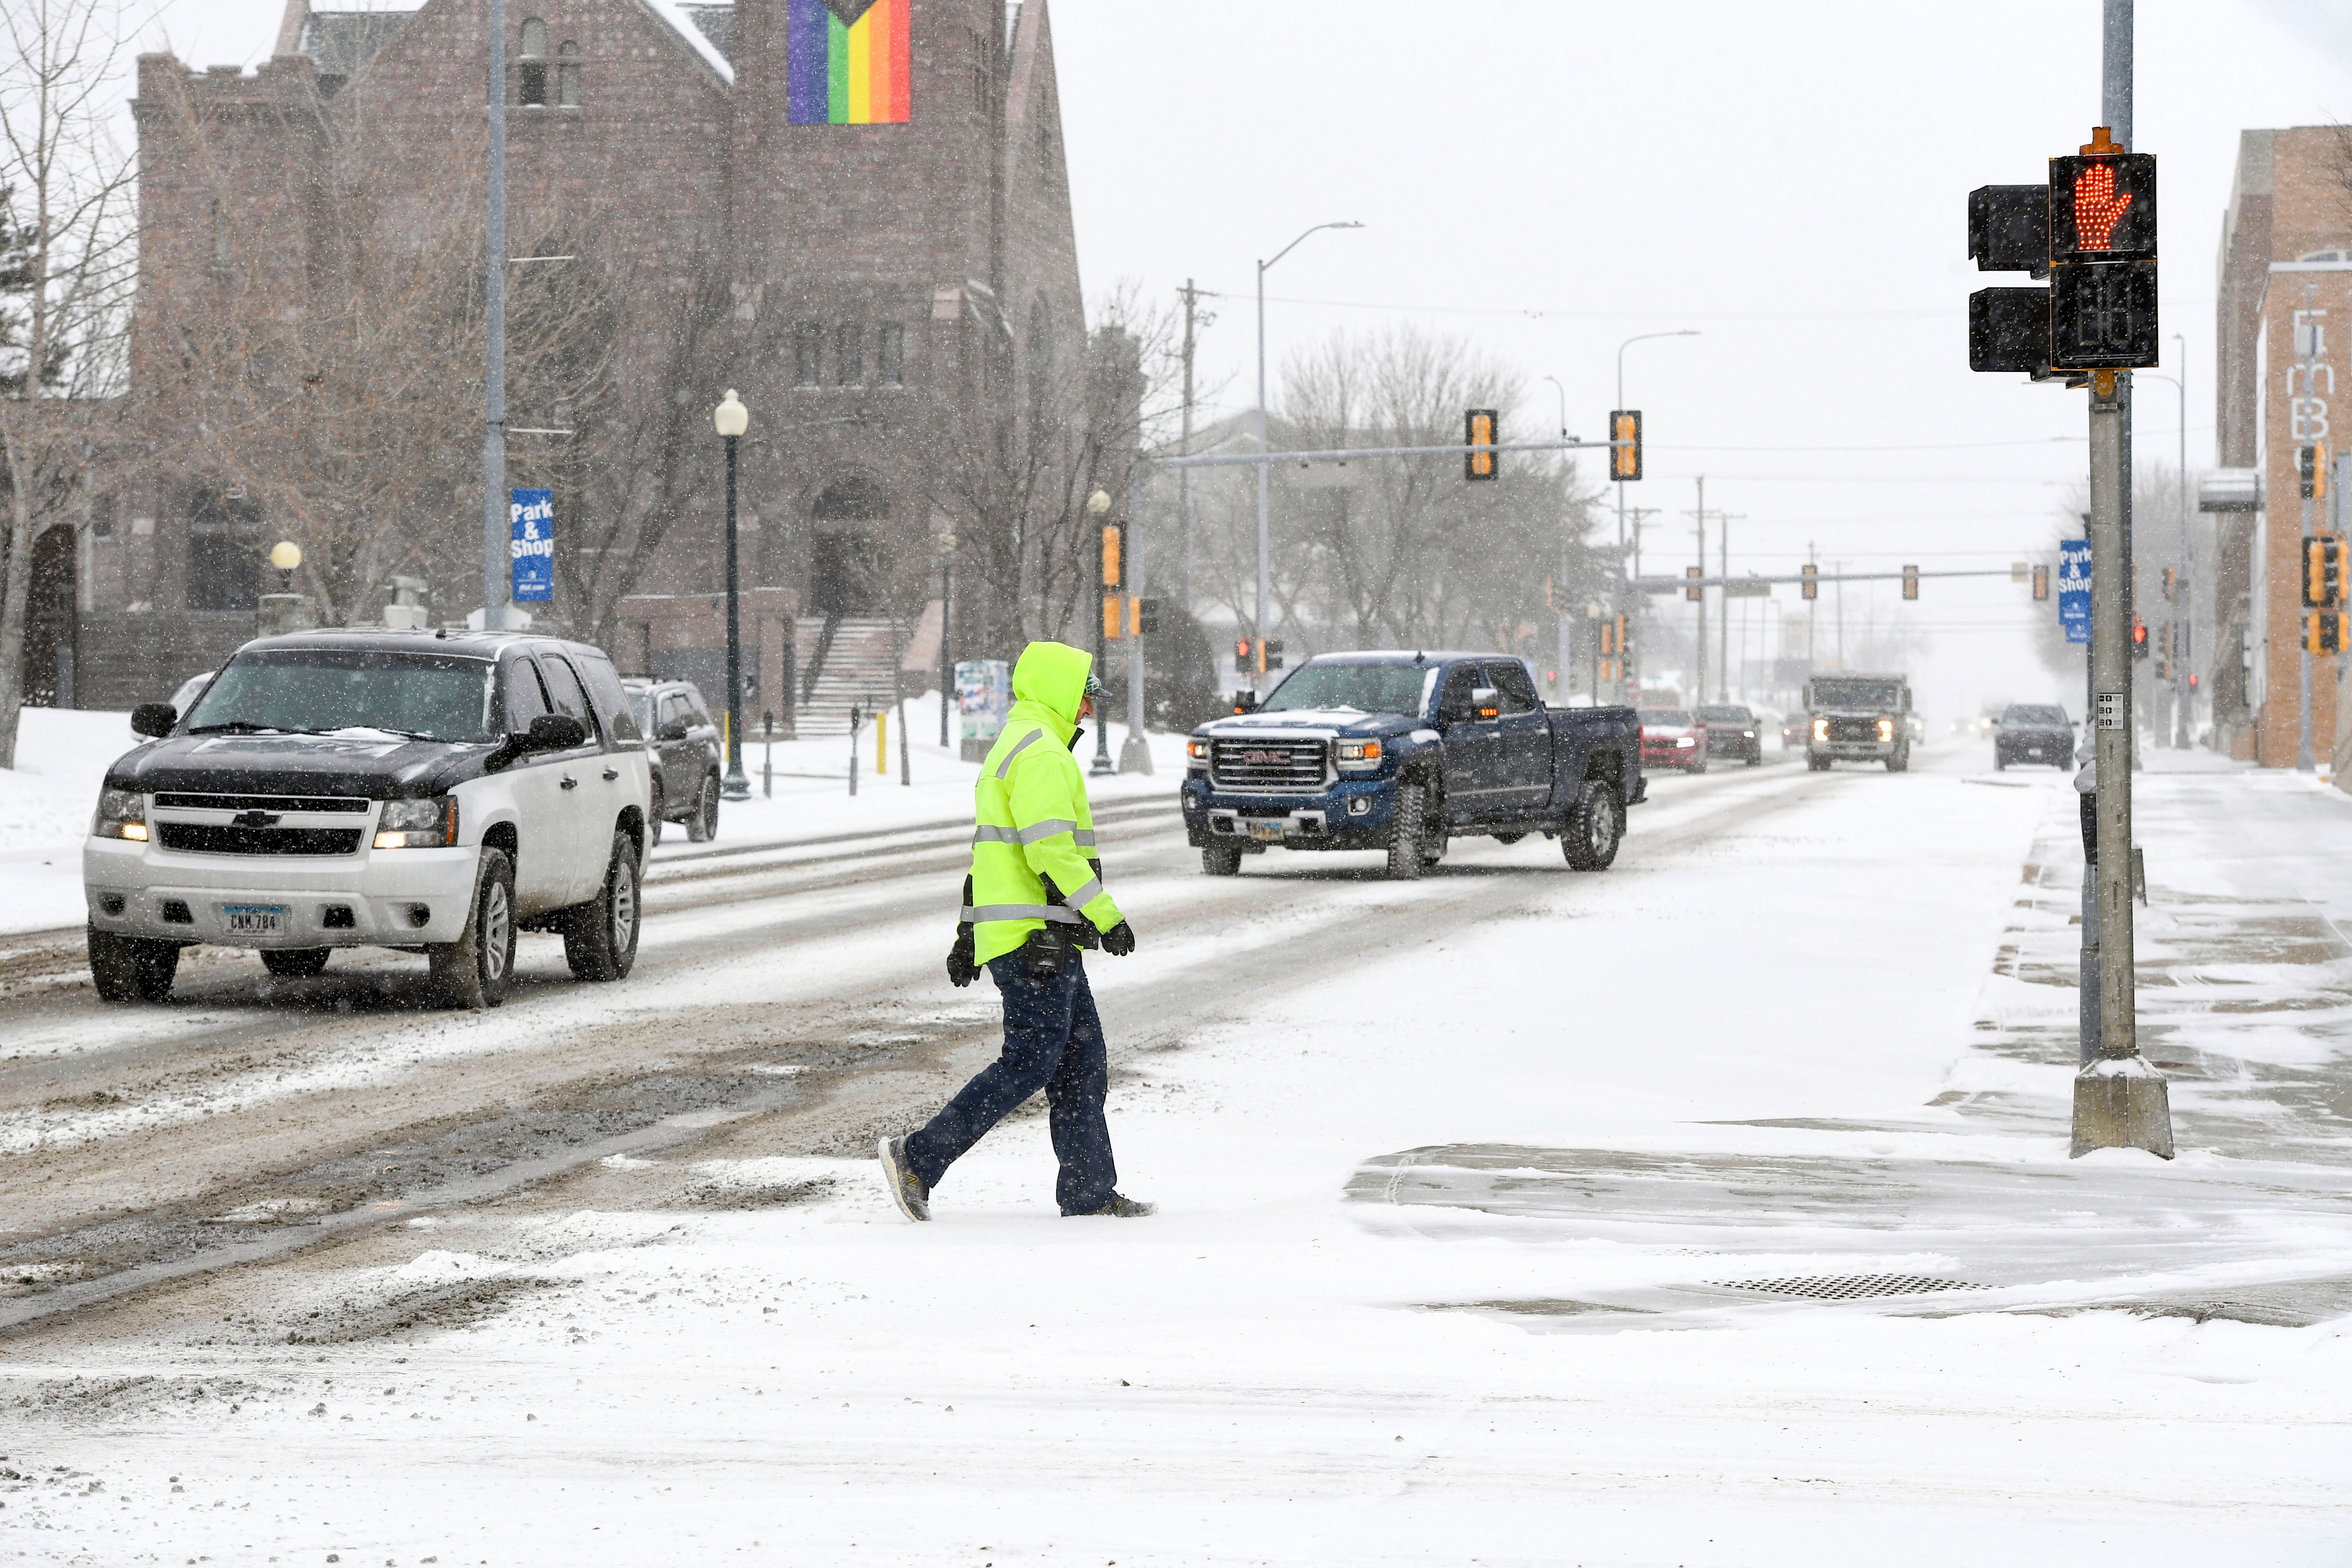 A pedestrian walks across town as the first snow falls ahead of a winter storm on Tuesday in Sioux Falls, South Dakota